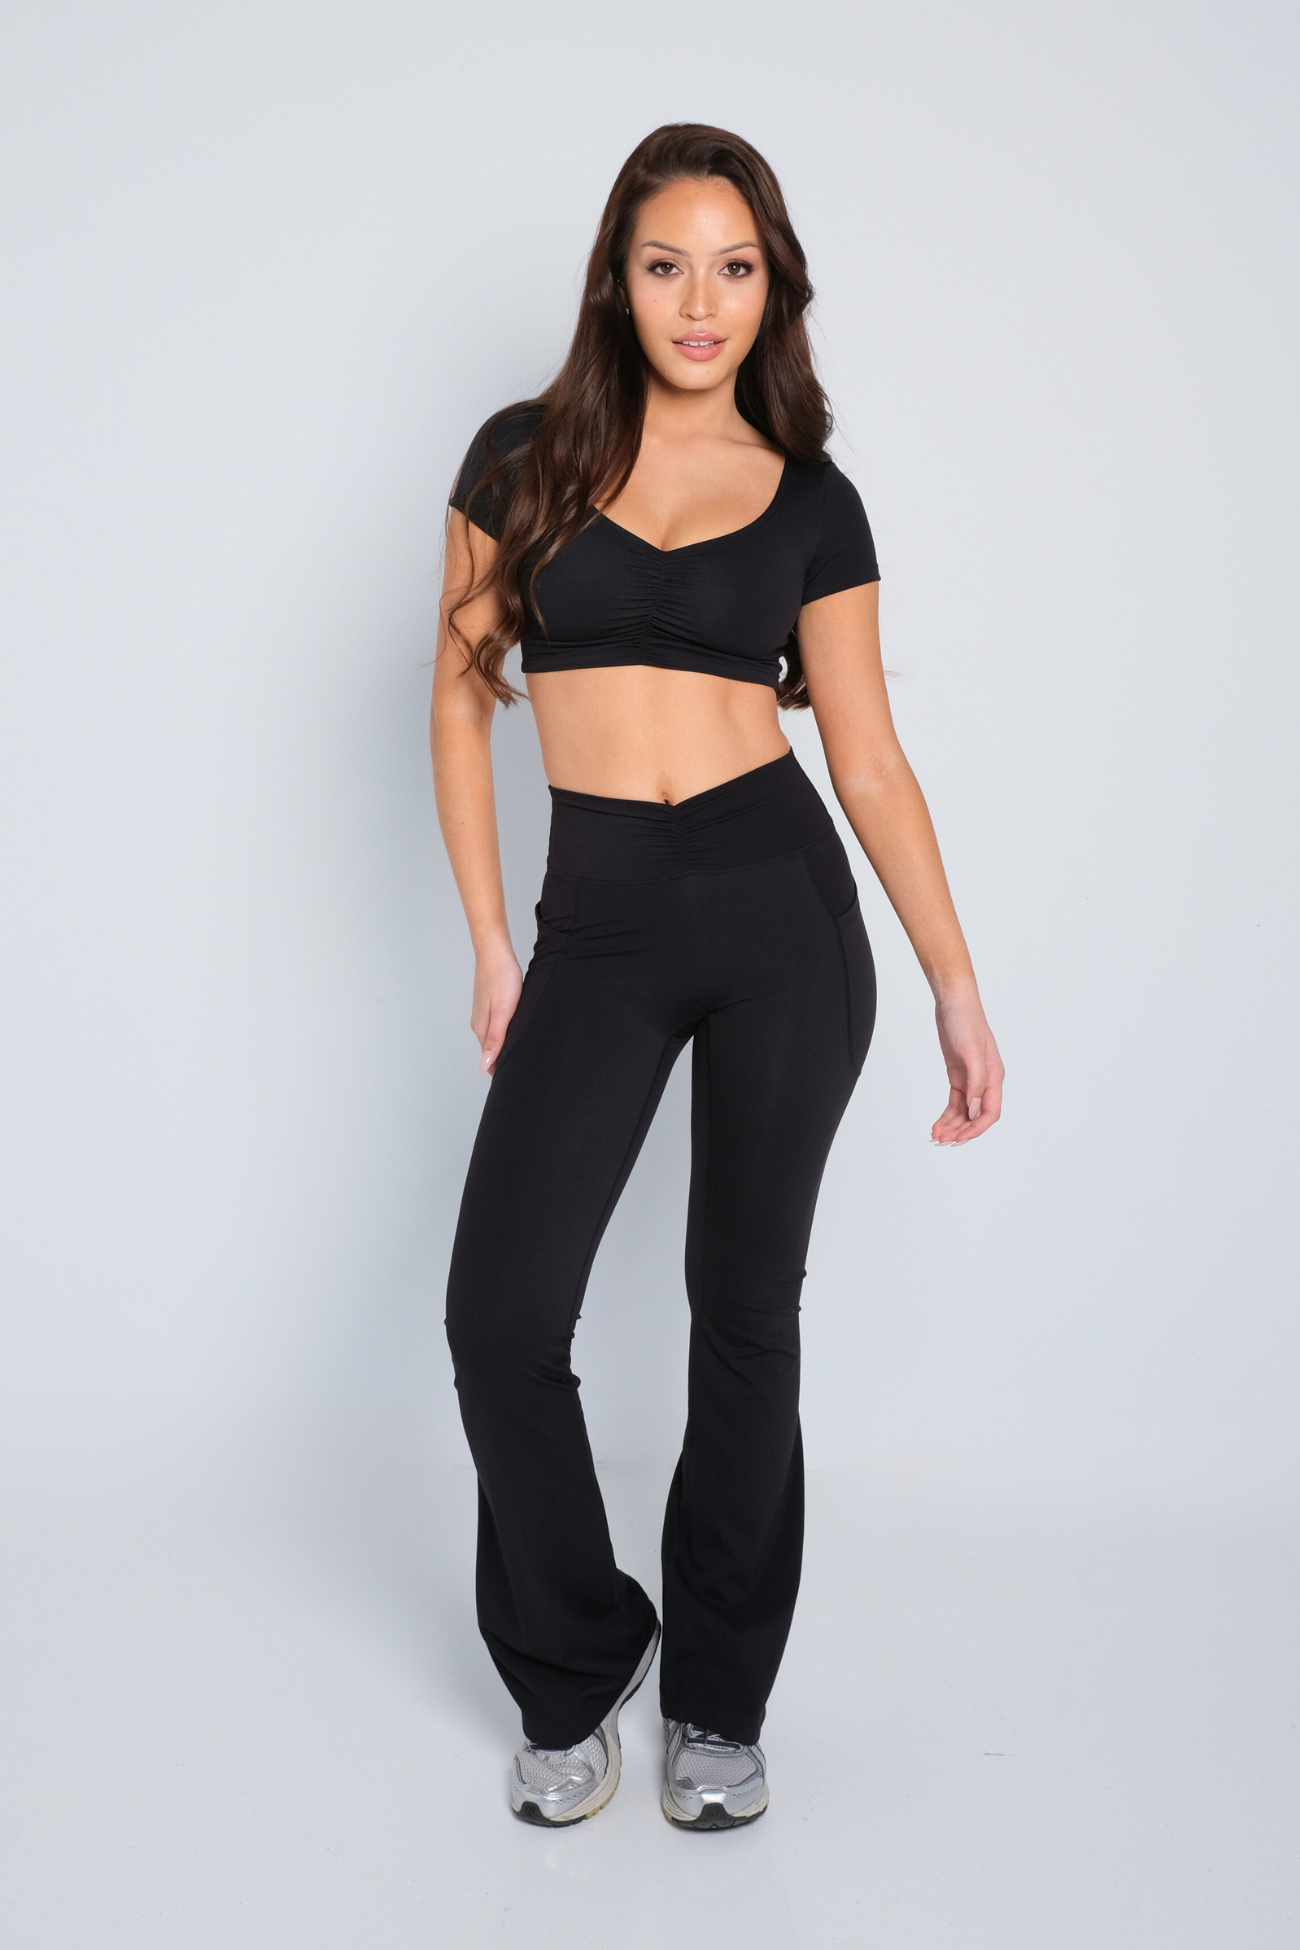 Ruched Flare Pocket (Tall) Leggings - Black – TwoTags